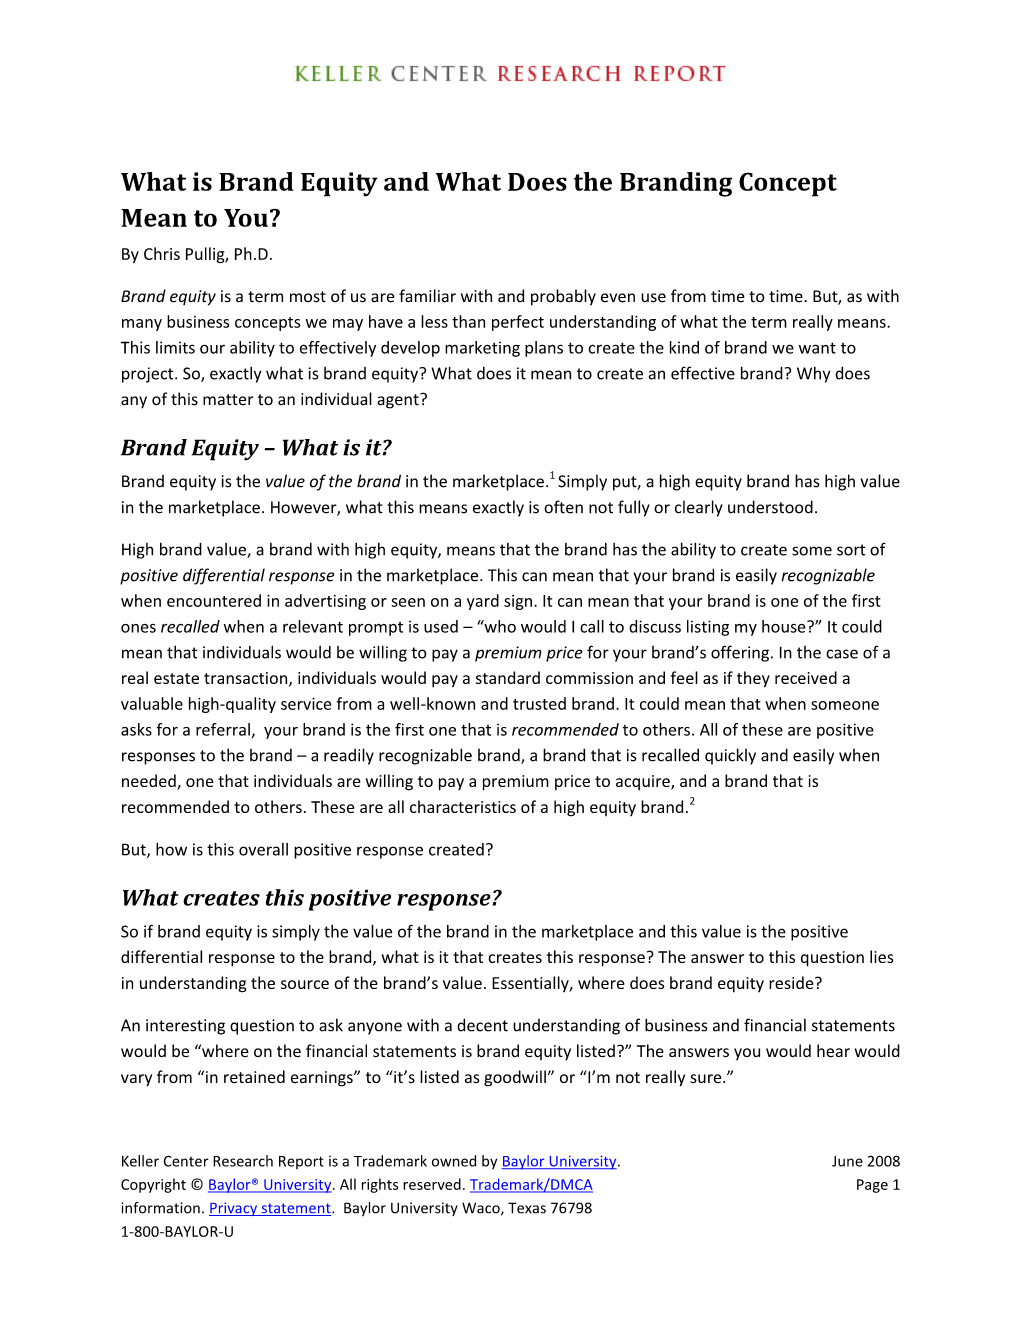 What Is Brand Equity and What Does the Branding Concept Mean to You? by Chris Pullig, Ph.D